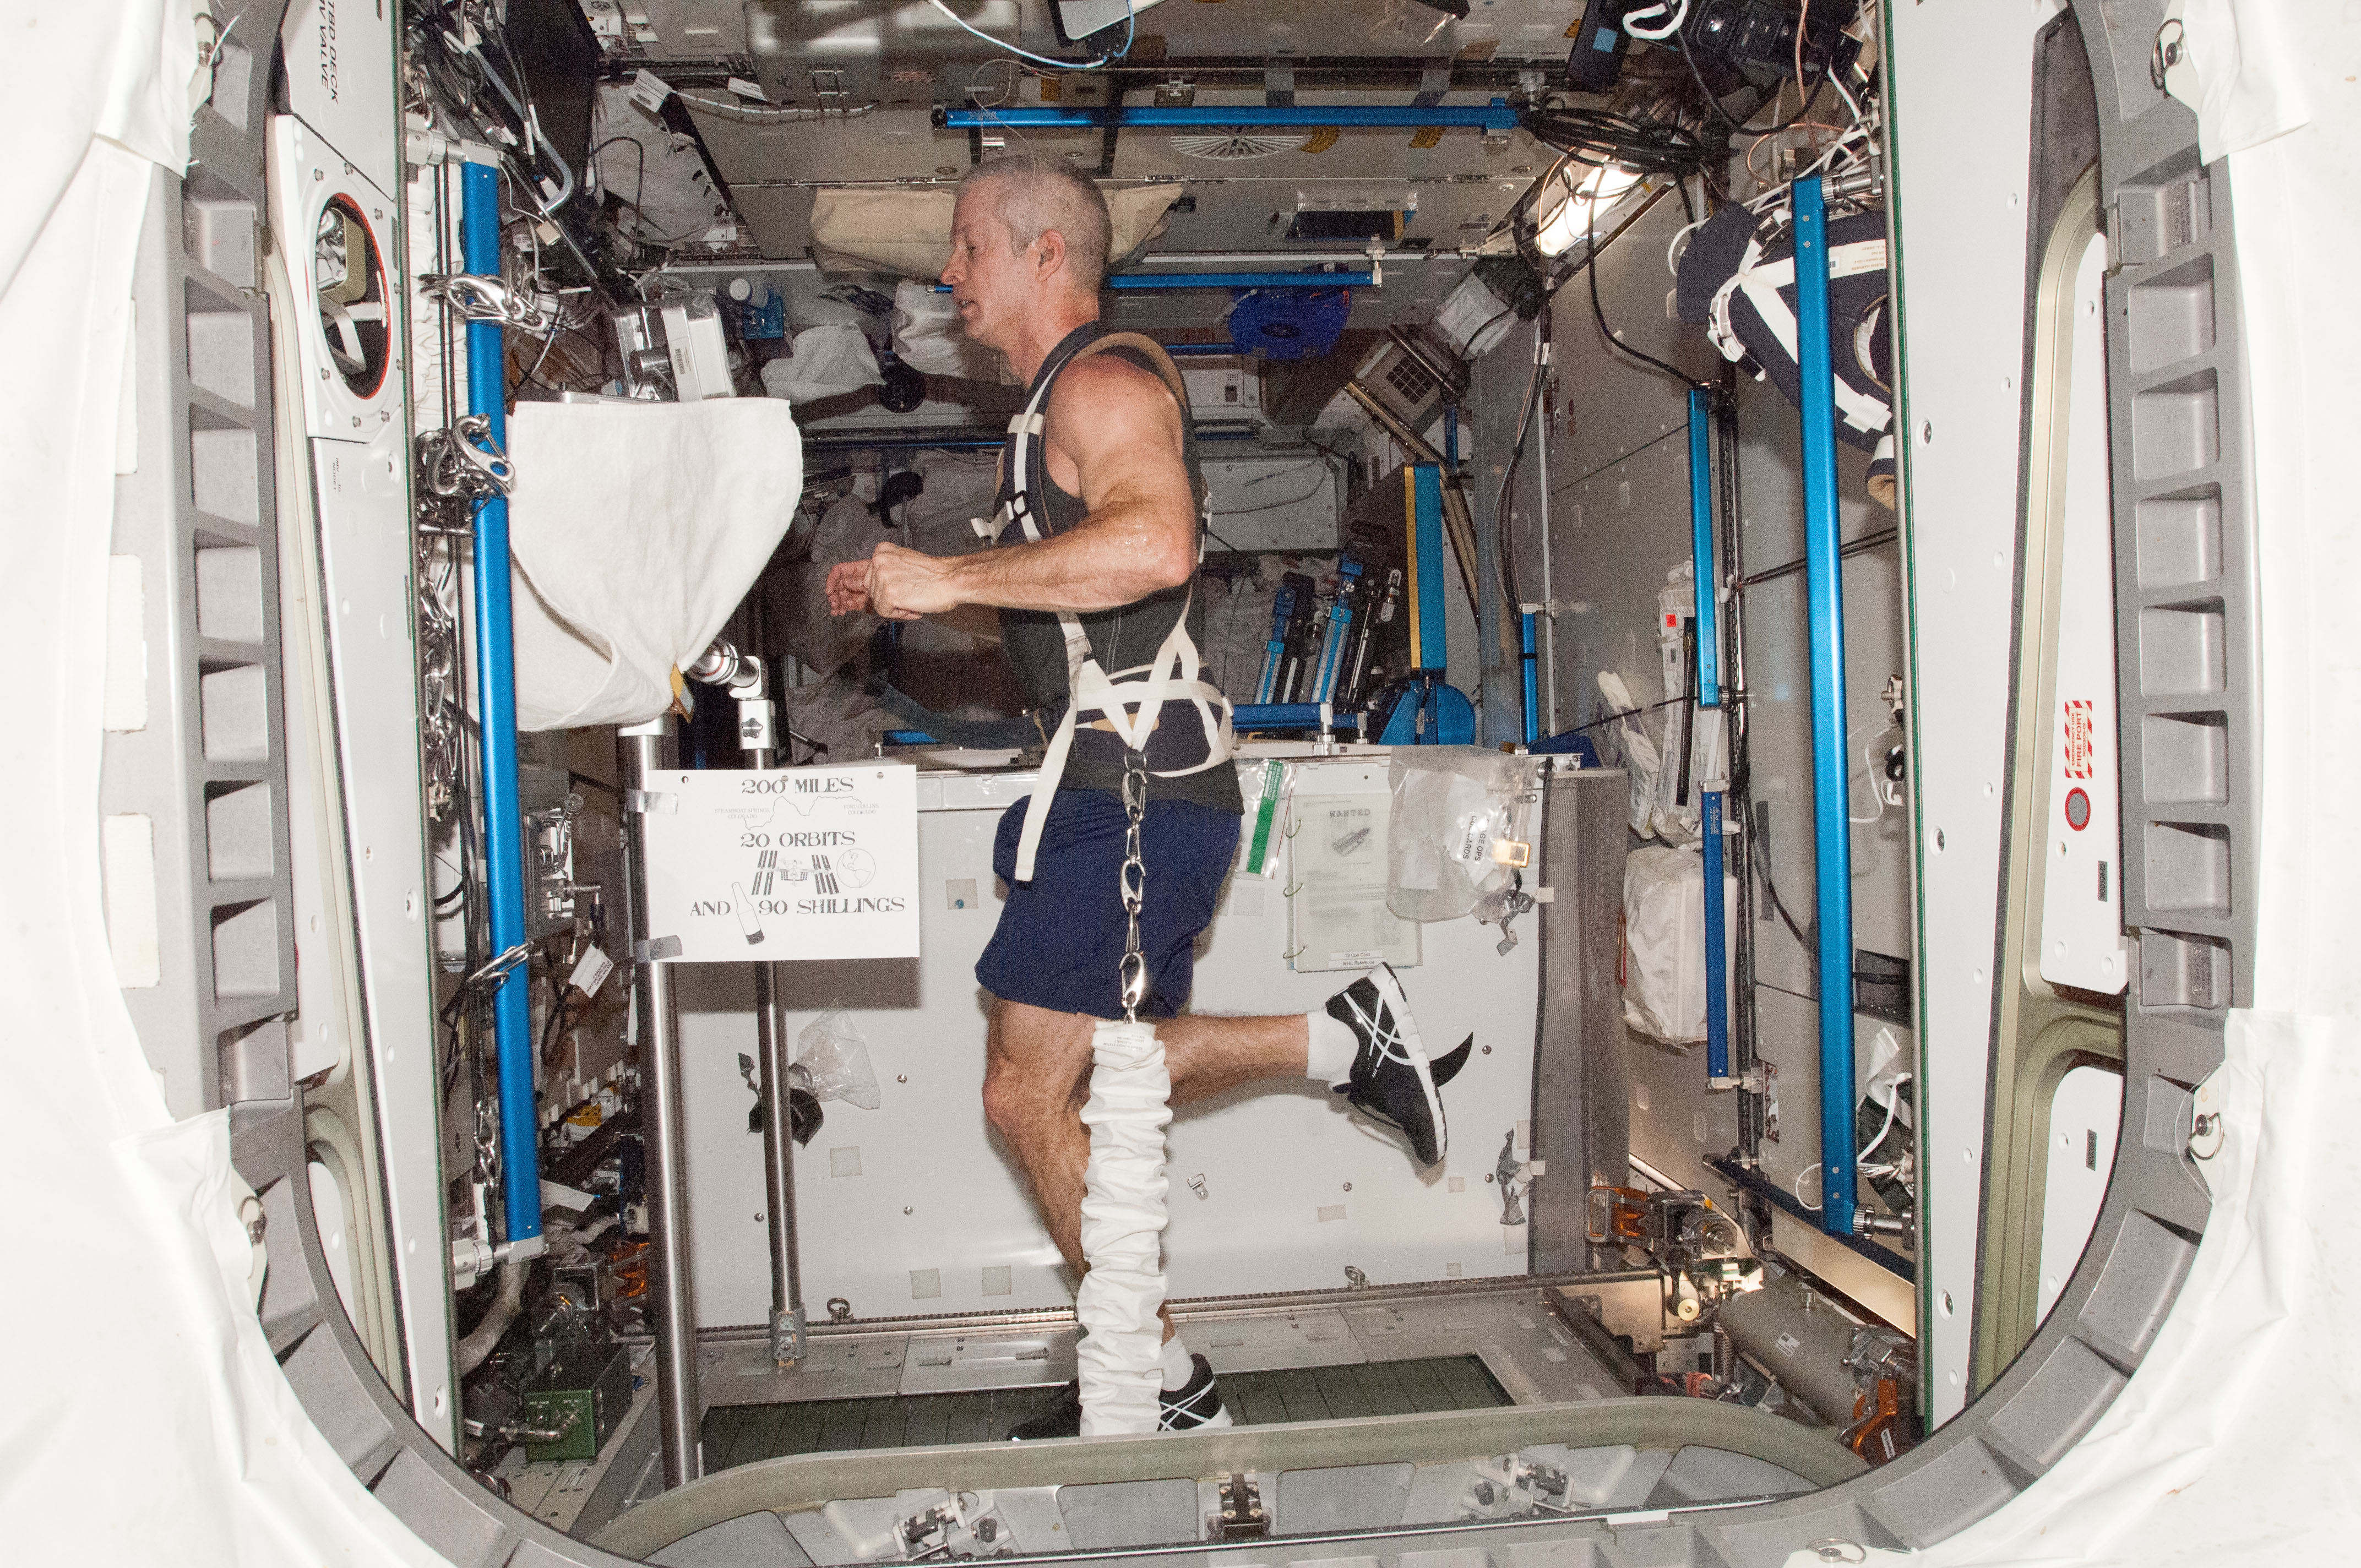 Exercise and Ergonomics on the International Space Station and Orion Spacecraft